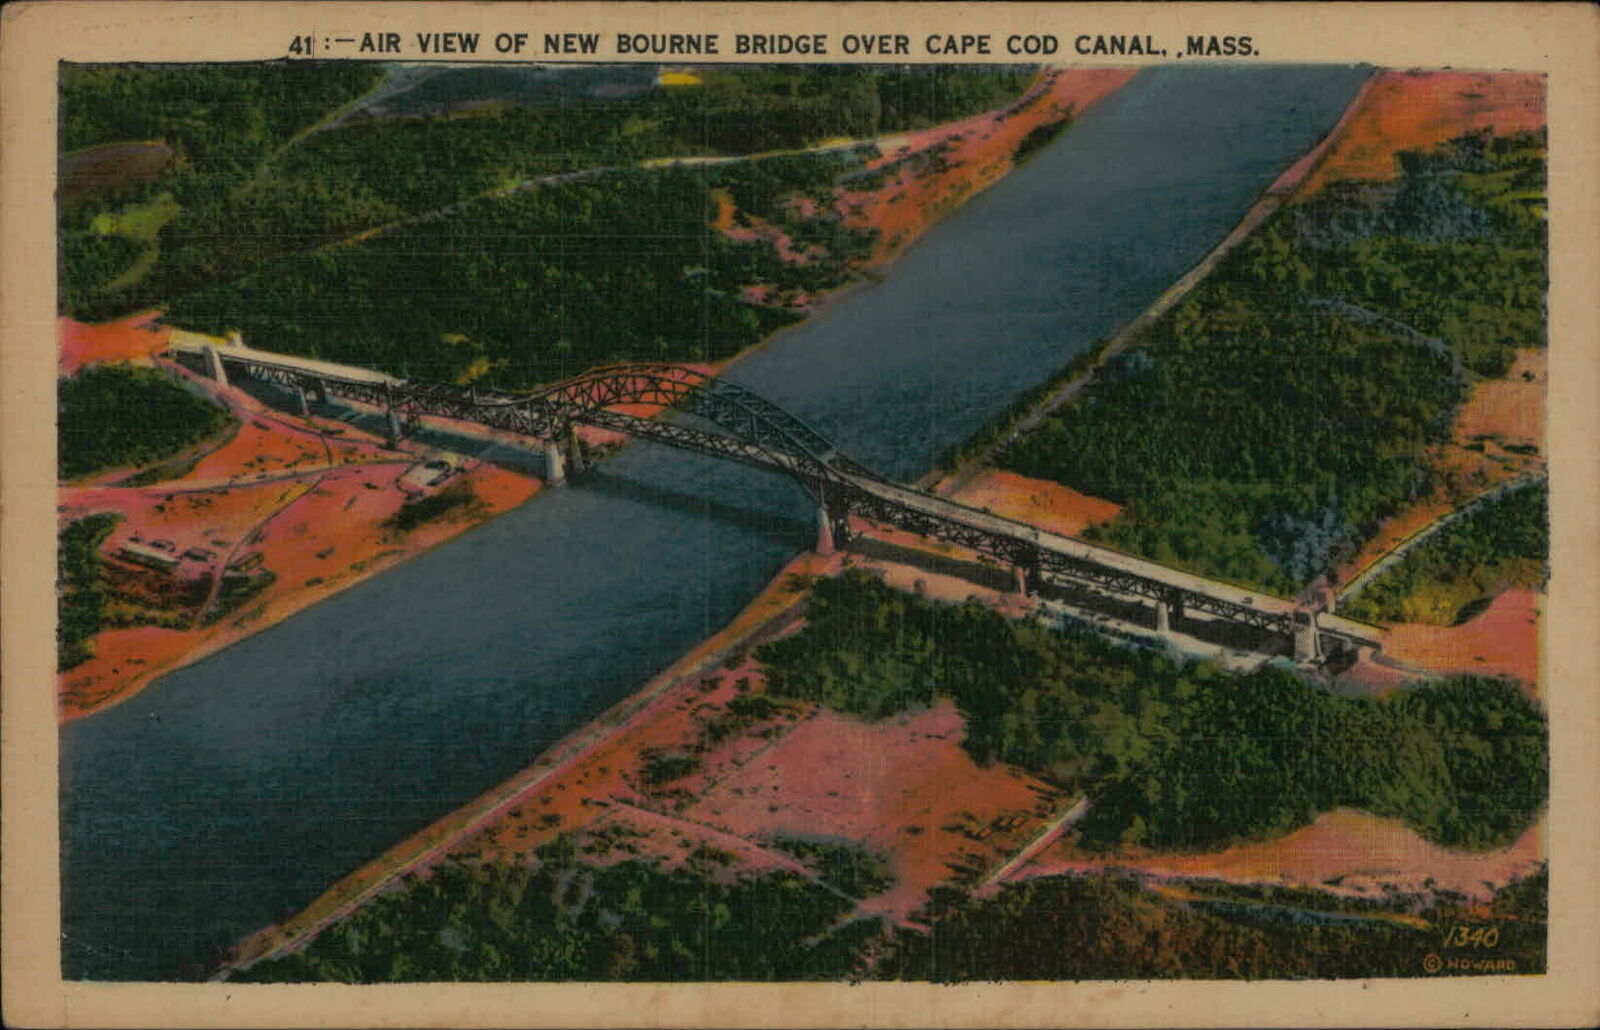 Postcard: 41-AIR VIEW OF NEW BOURNE BRIDGE OVER CAPE COD CANAL, MASS.